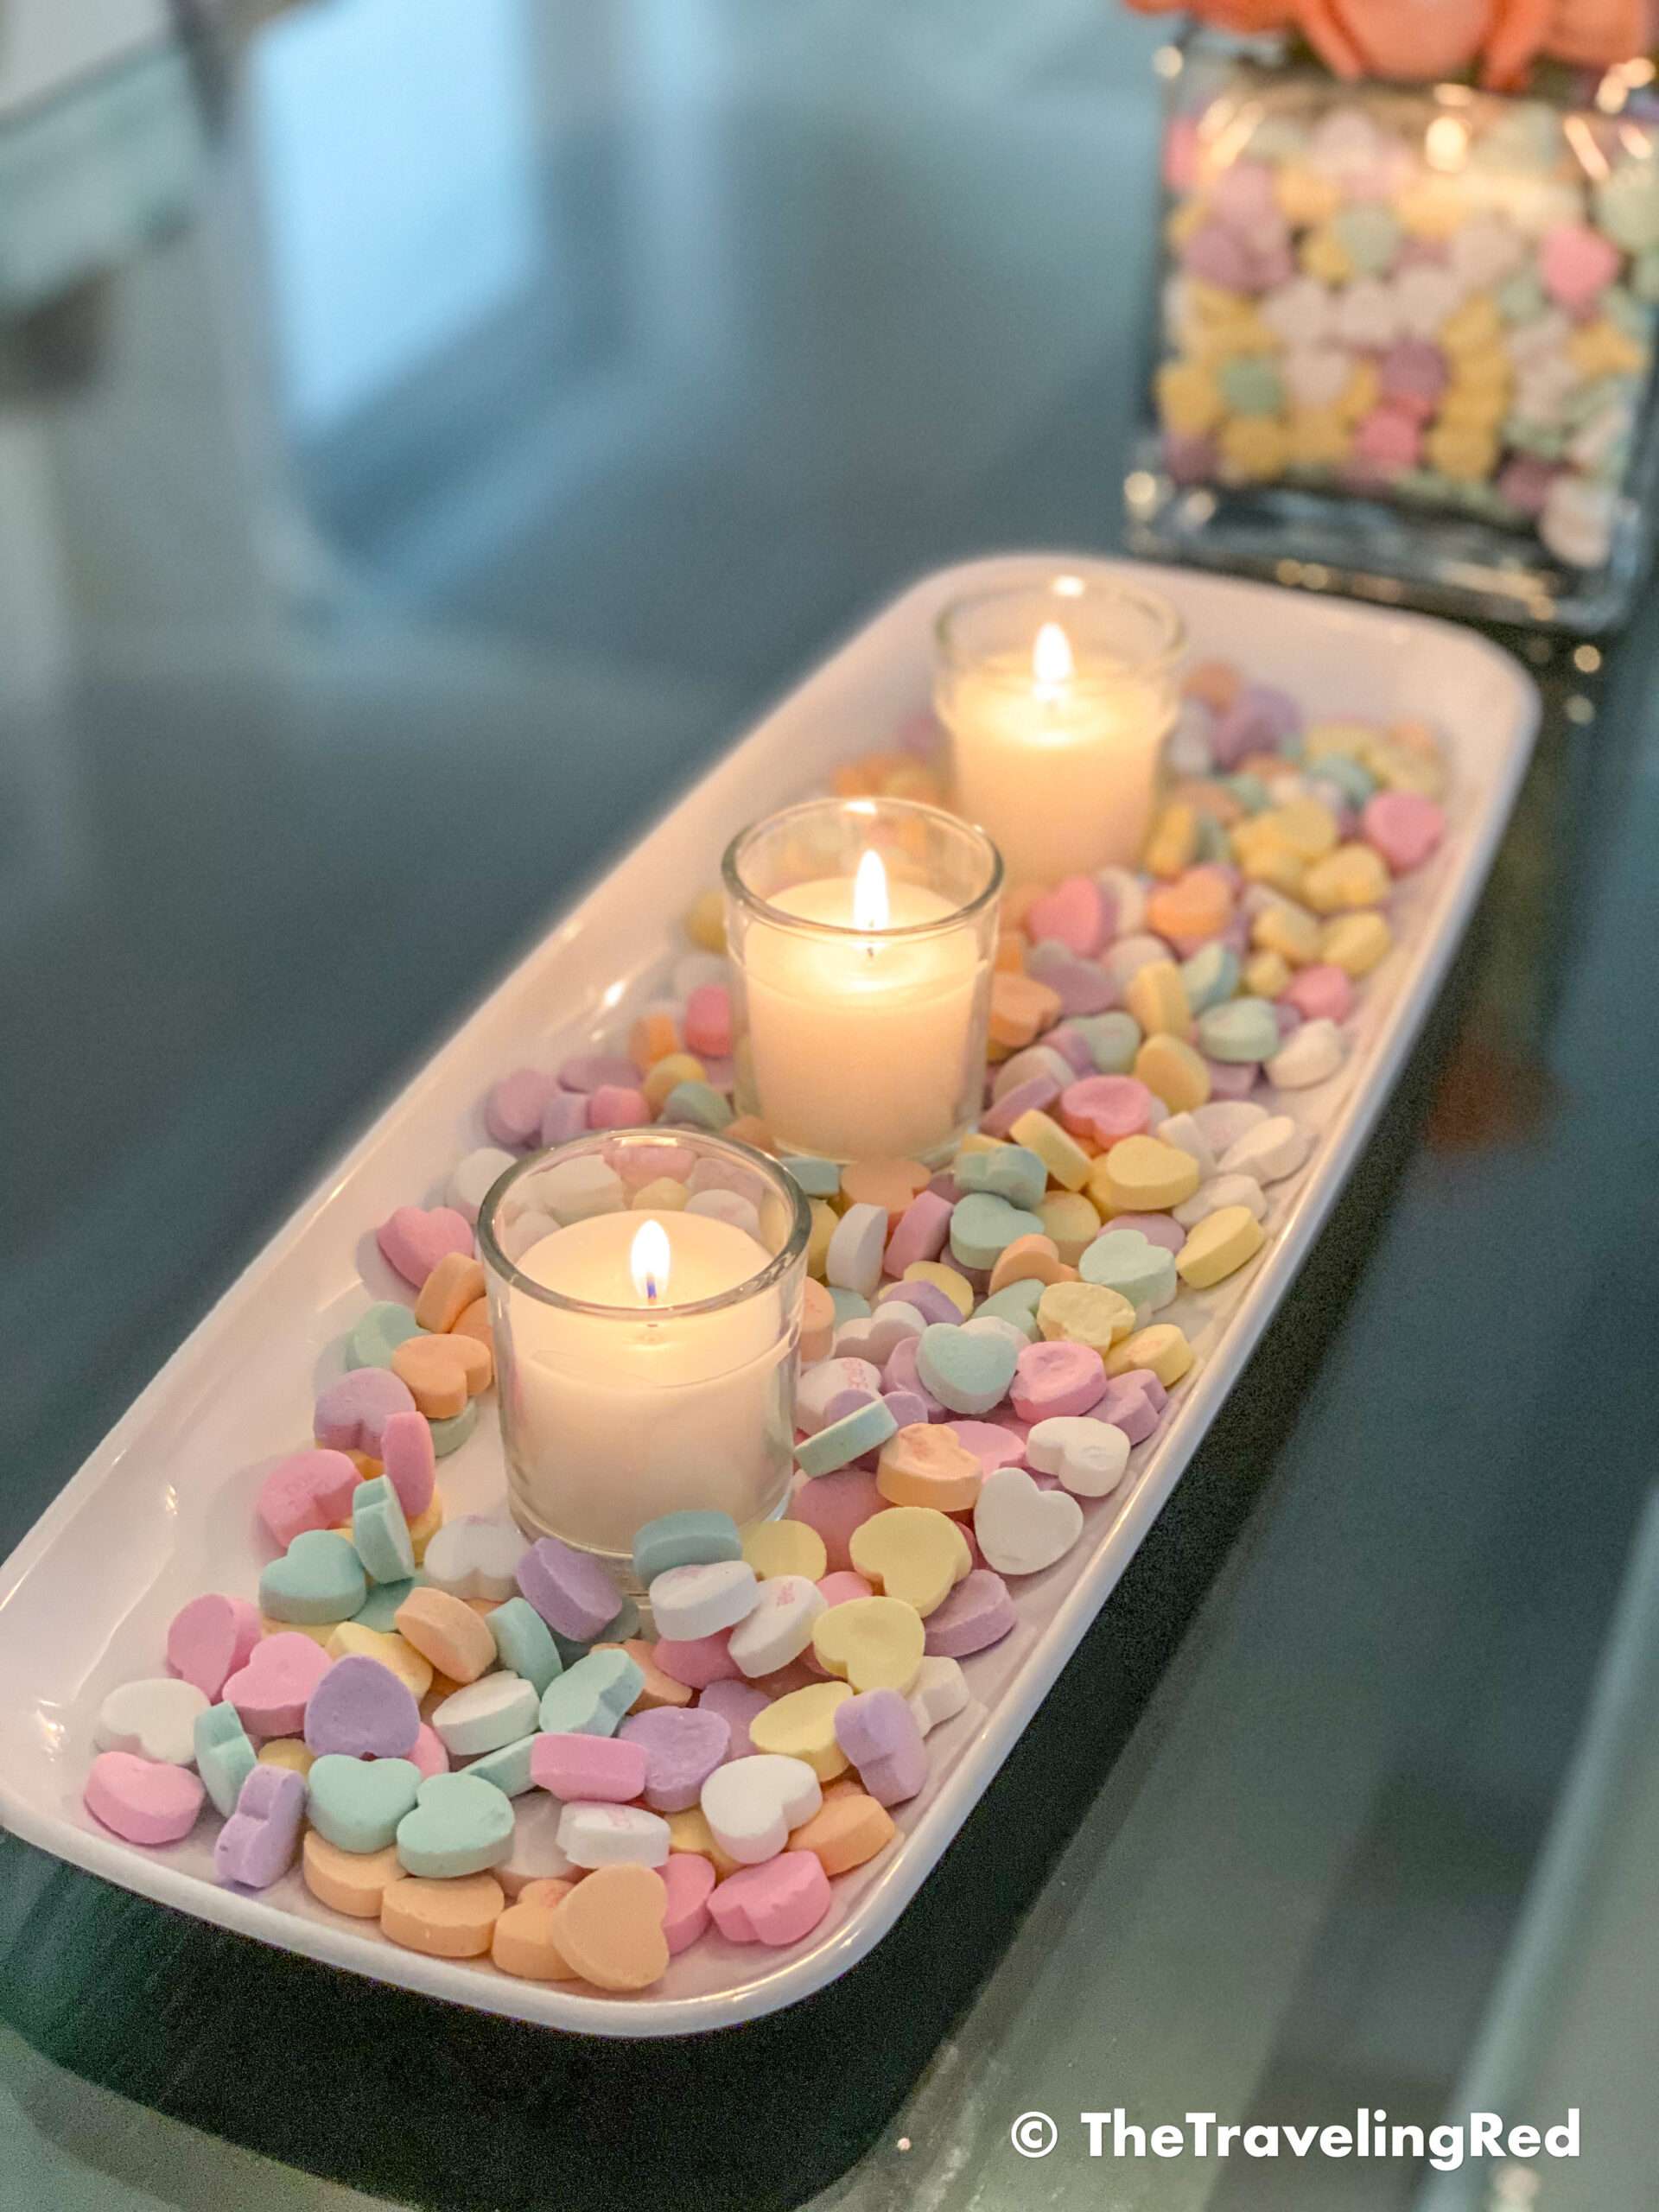 Valentine's Day Home Decor Dining Room Table Decor for a Valentines Day party using plastic trays, glass vases, sweetheart candies, votive candles & fresh roses - #valentinesday #valentinesdaydecor #homedecor #tabledecor #valentinesdayhomedecor